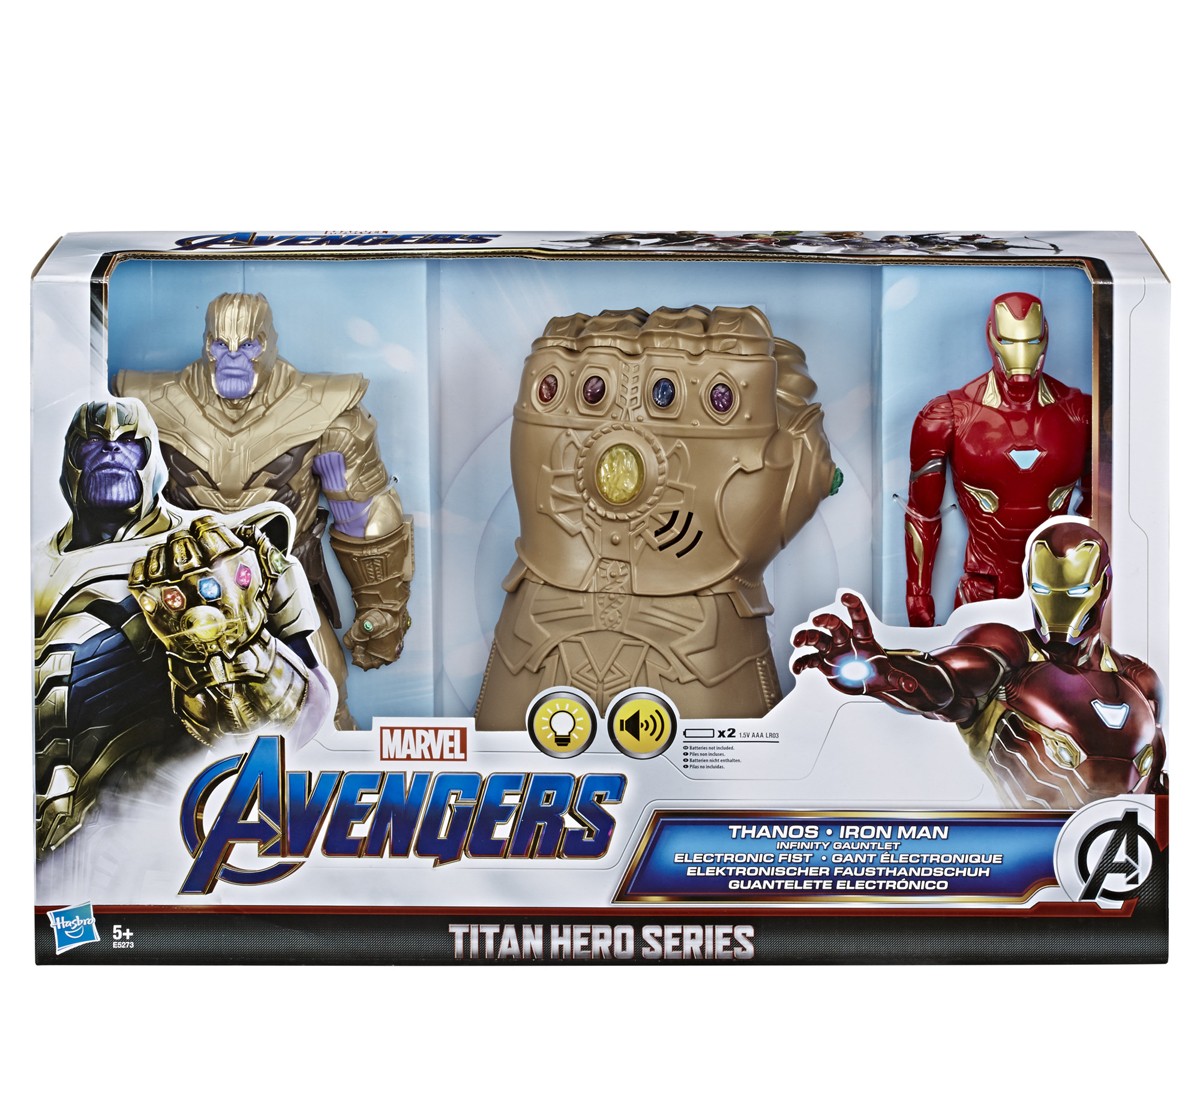 Marvel Avengers Titan Hero Series Infinity Gauntlet Electronic Fist with Thanos and Iron Man Action Figures Multicolor 4Y+